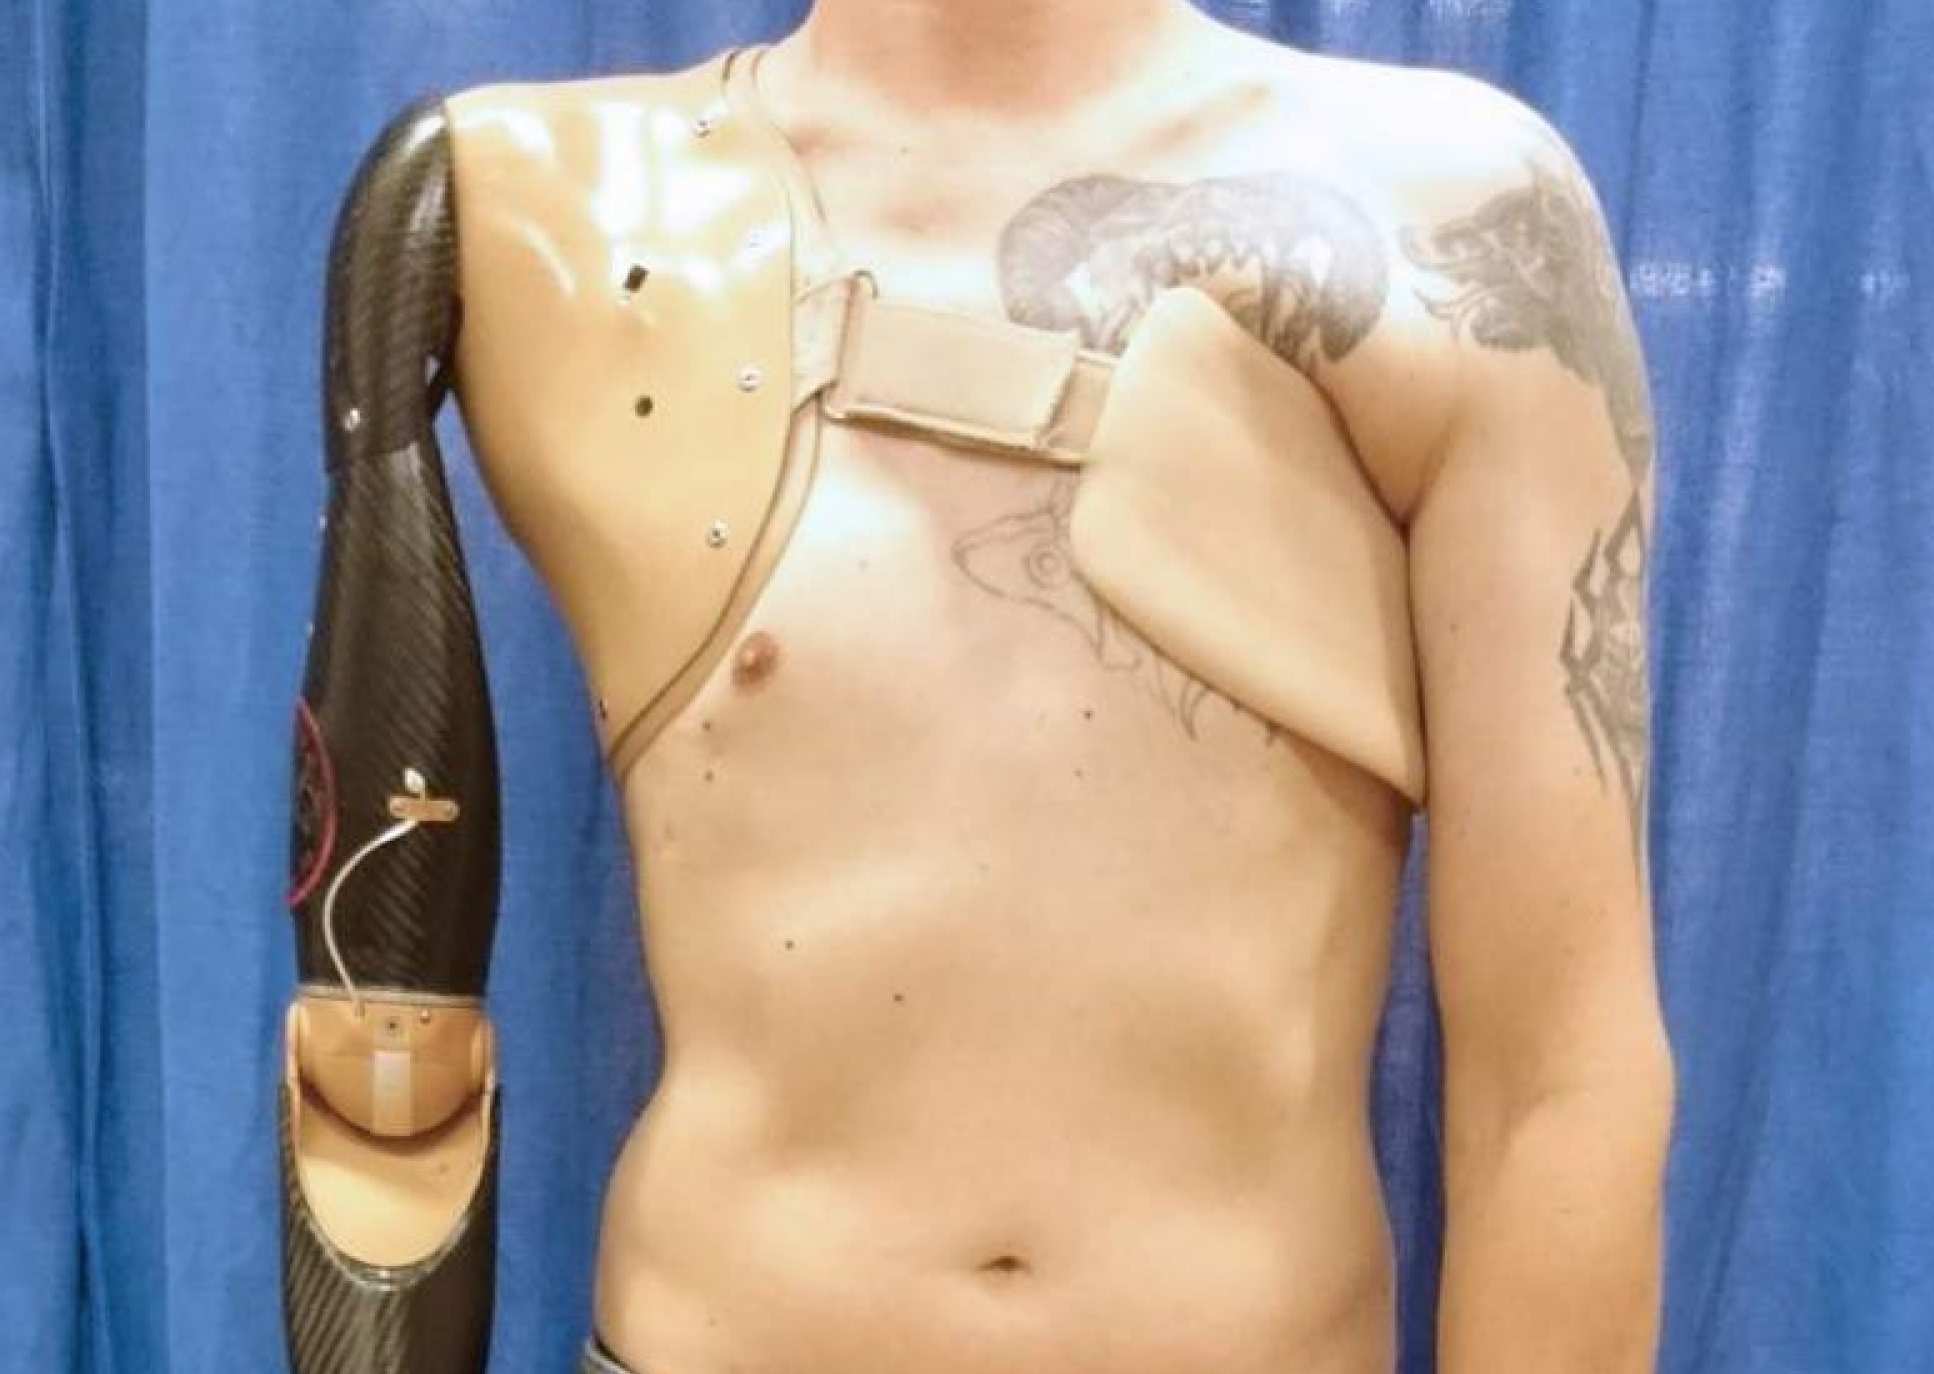 Torso of a man with a robotic arm strapped to his chest